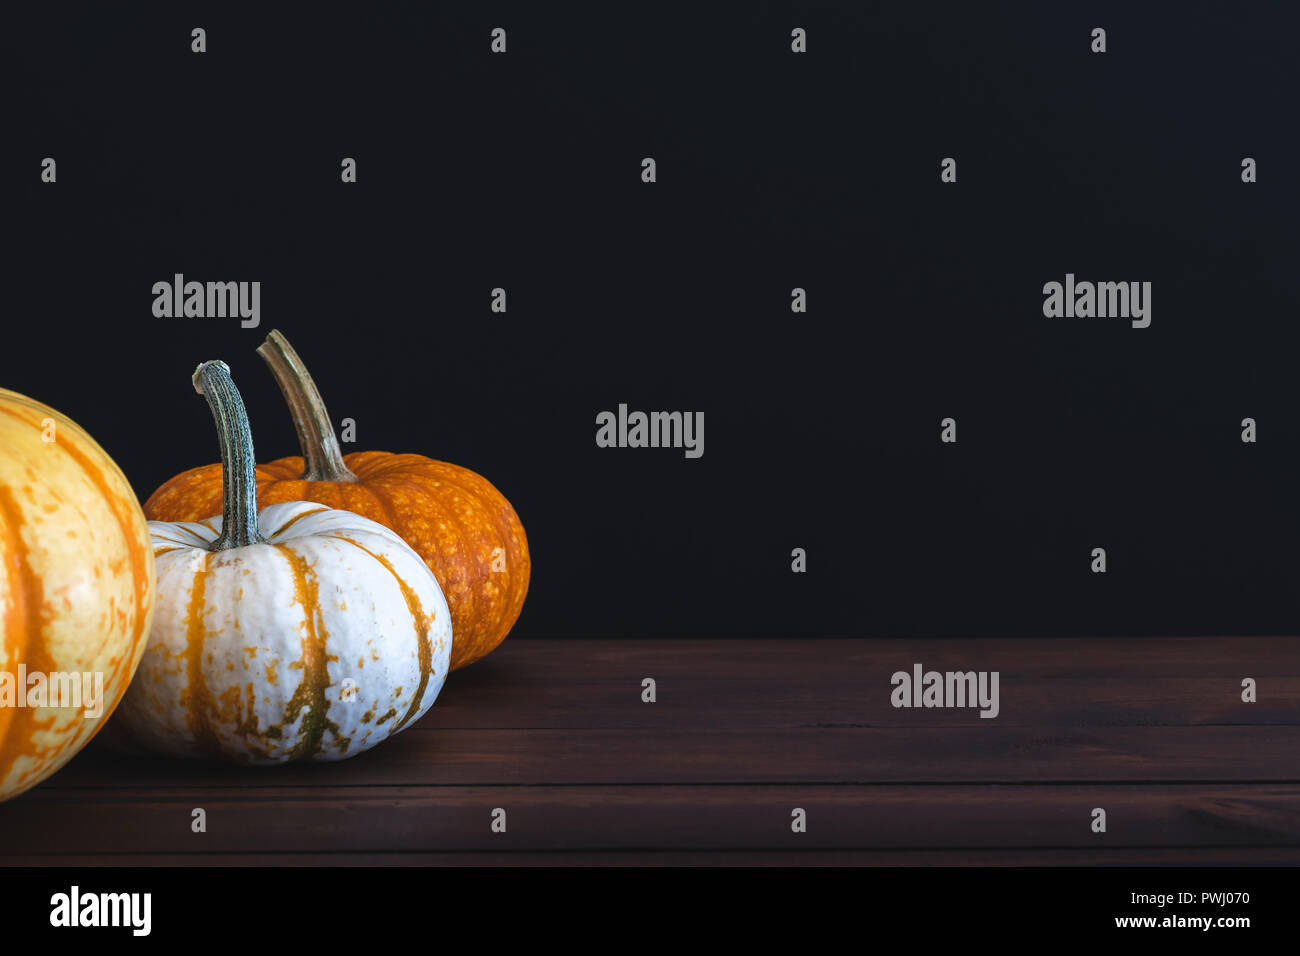 Multiple pumpkins on brown table with black background for copy space of holiday messaging. Stock Photo